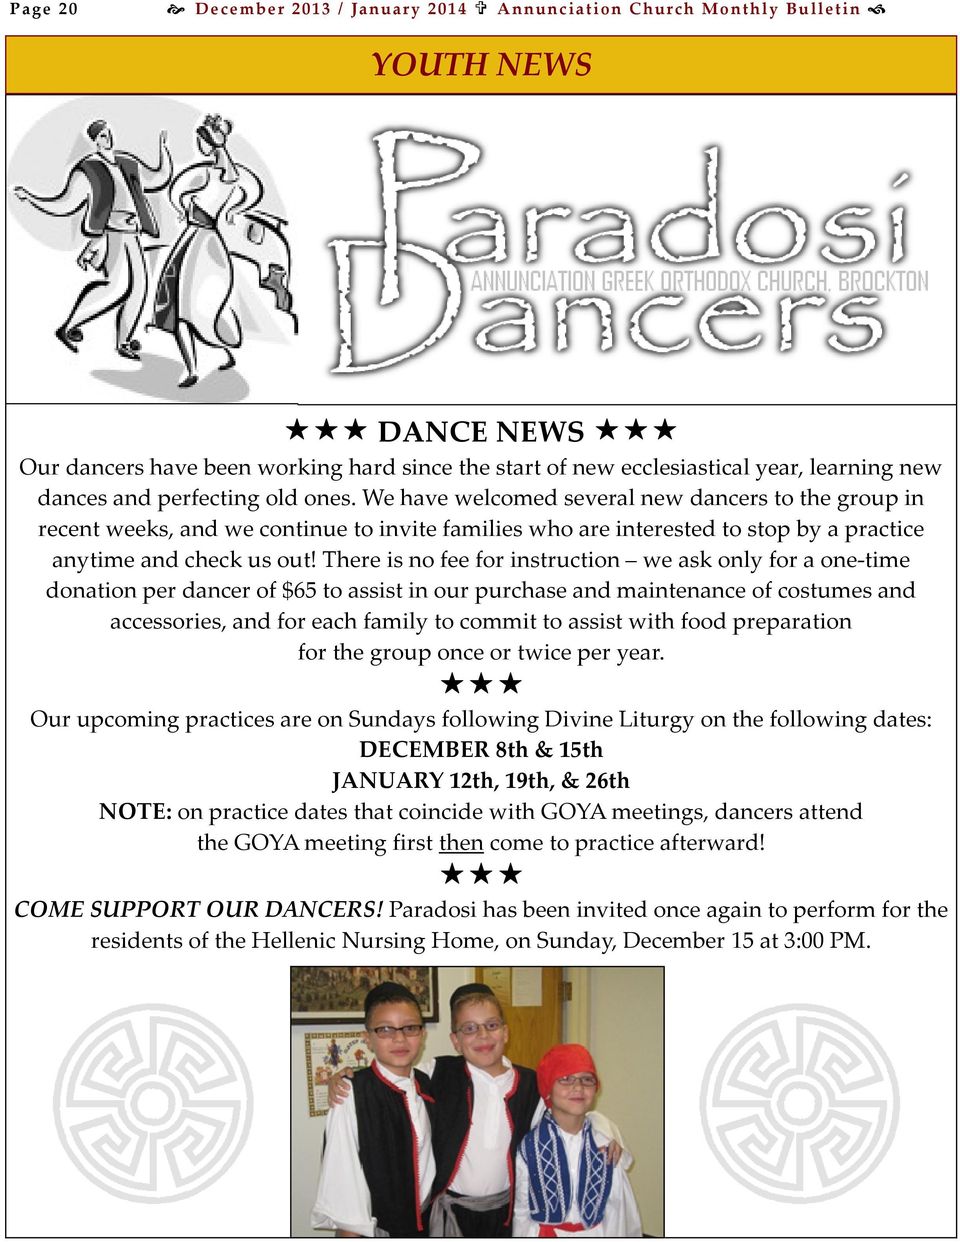 There is no fee for instruction we ask only for a one-time donation per dancer of $65 to assist in our purchase and maintenance of costumes and accessories, and for each family to commit to assist